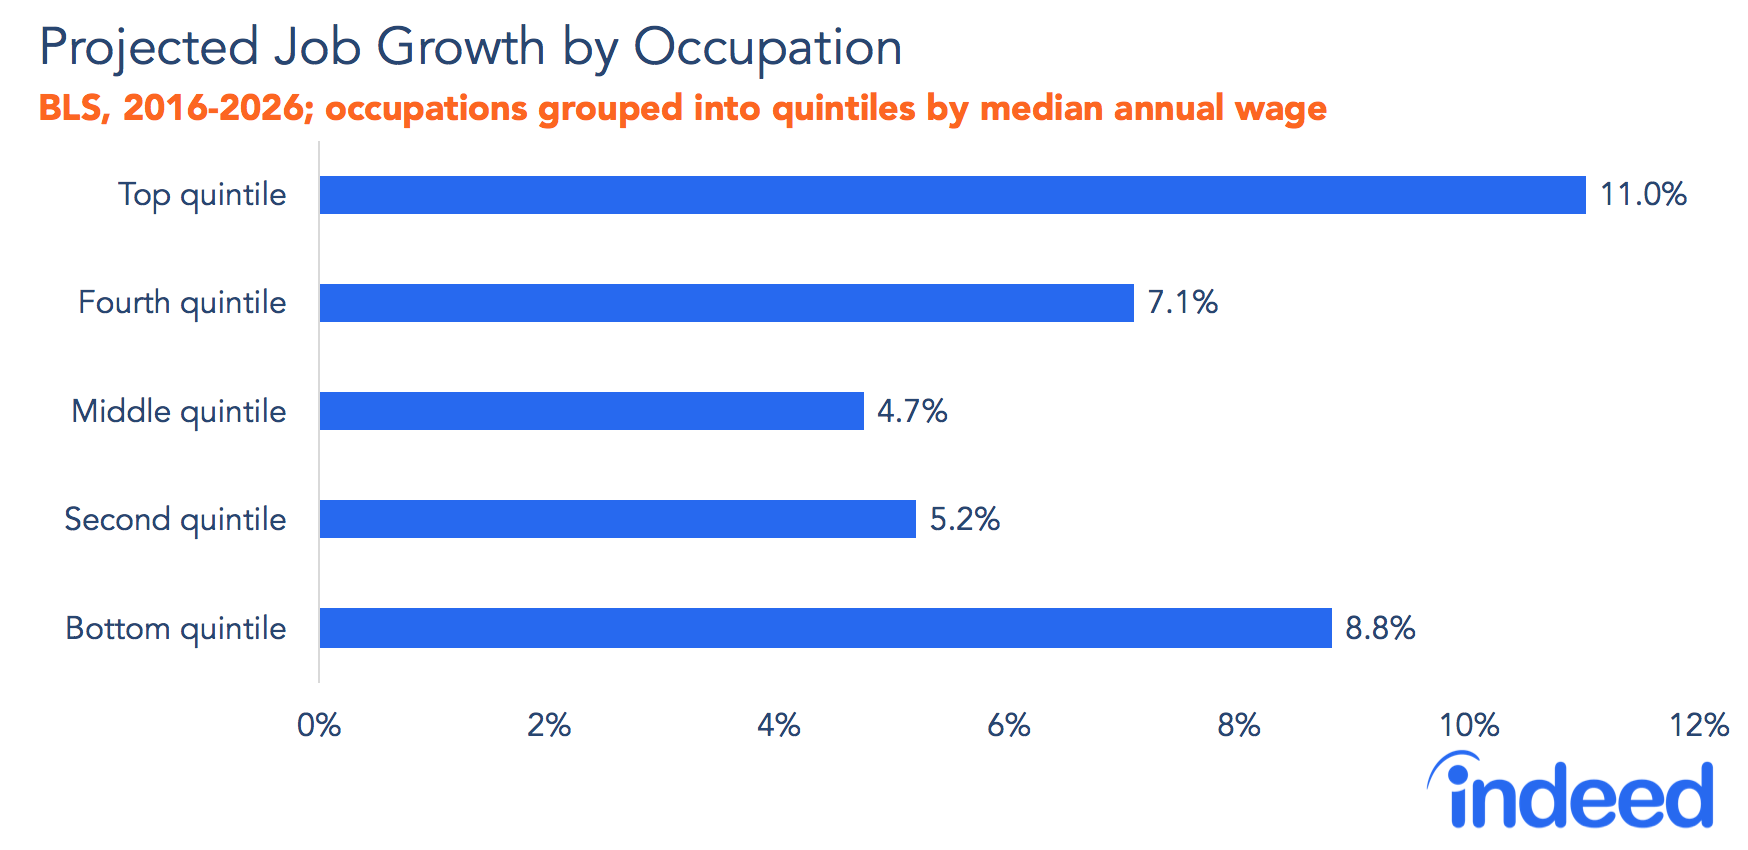 Projected job growth by occupation